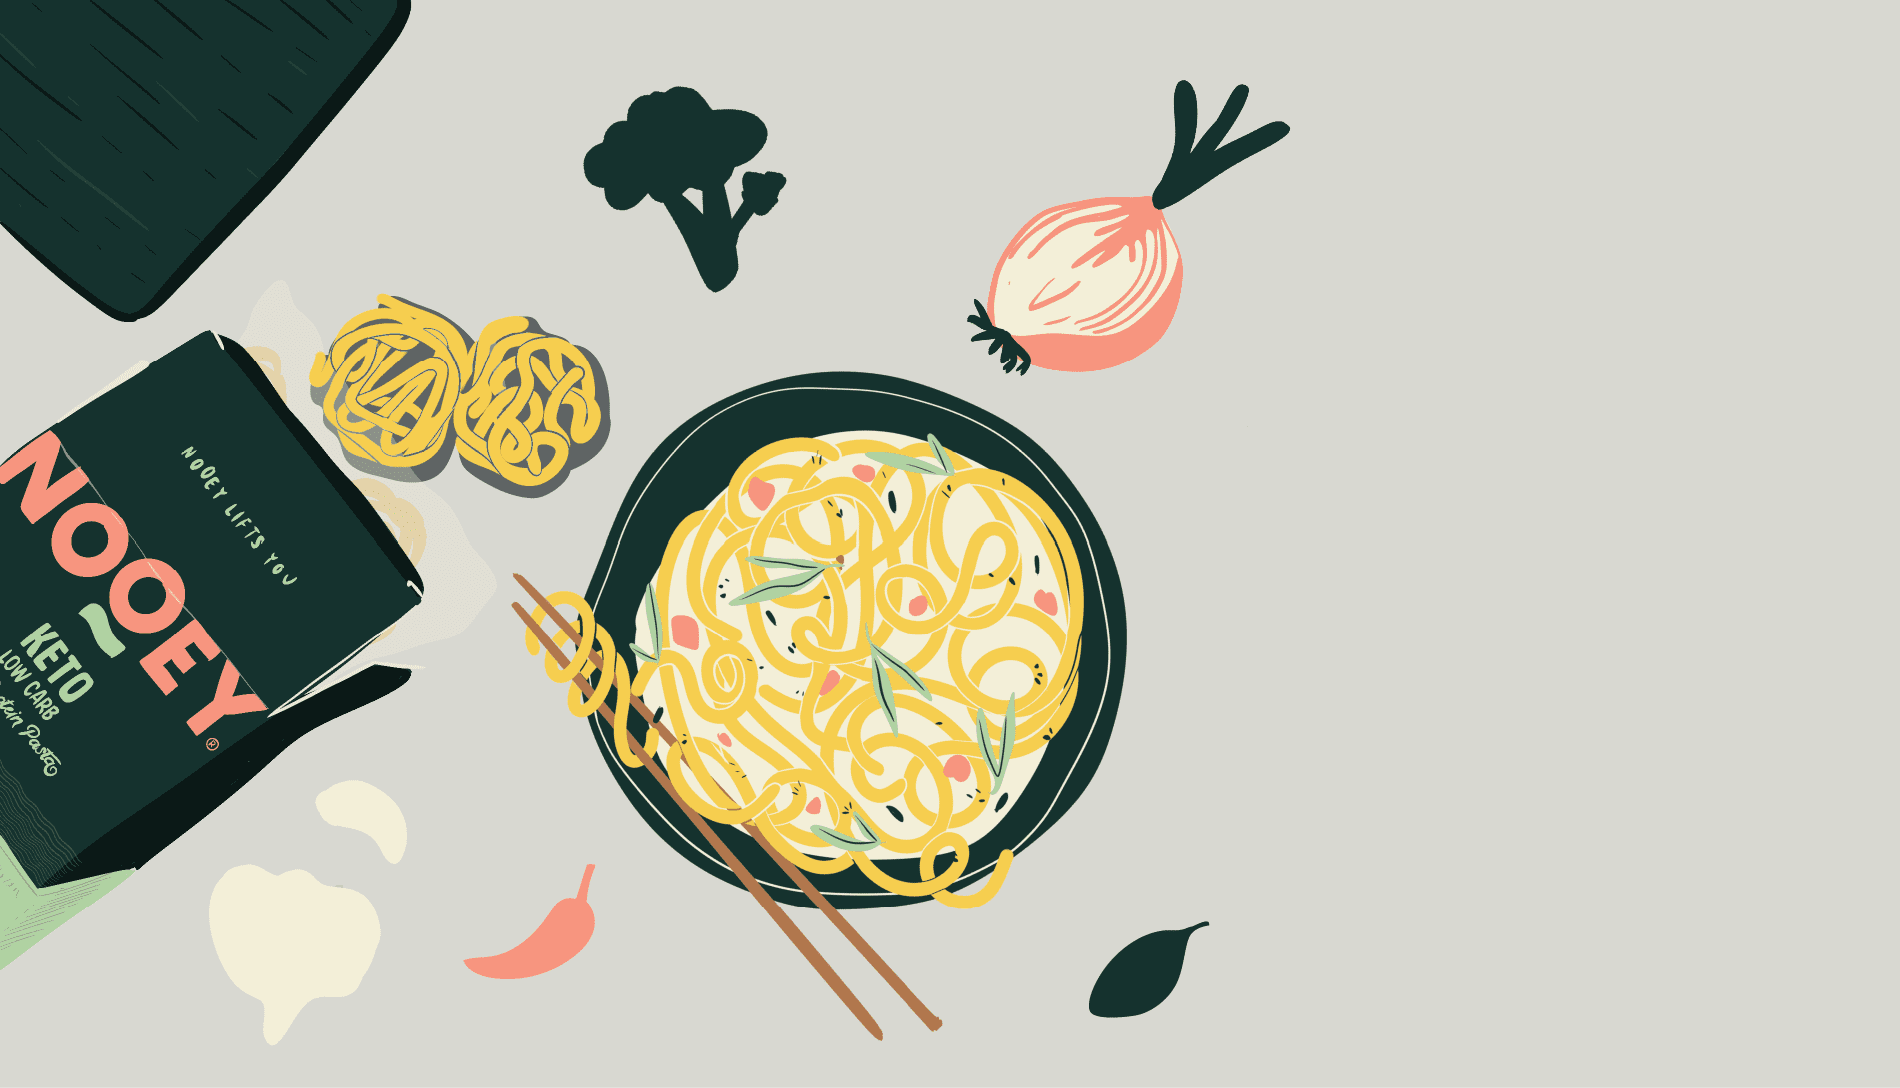 Nooey bowl of noodles image with ingredients